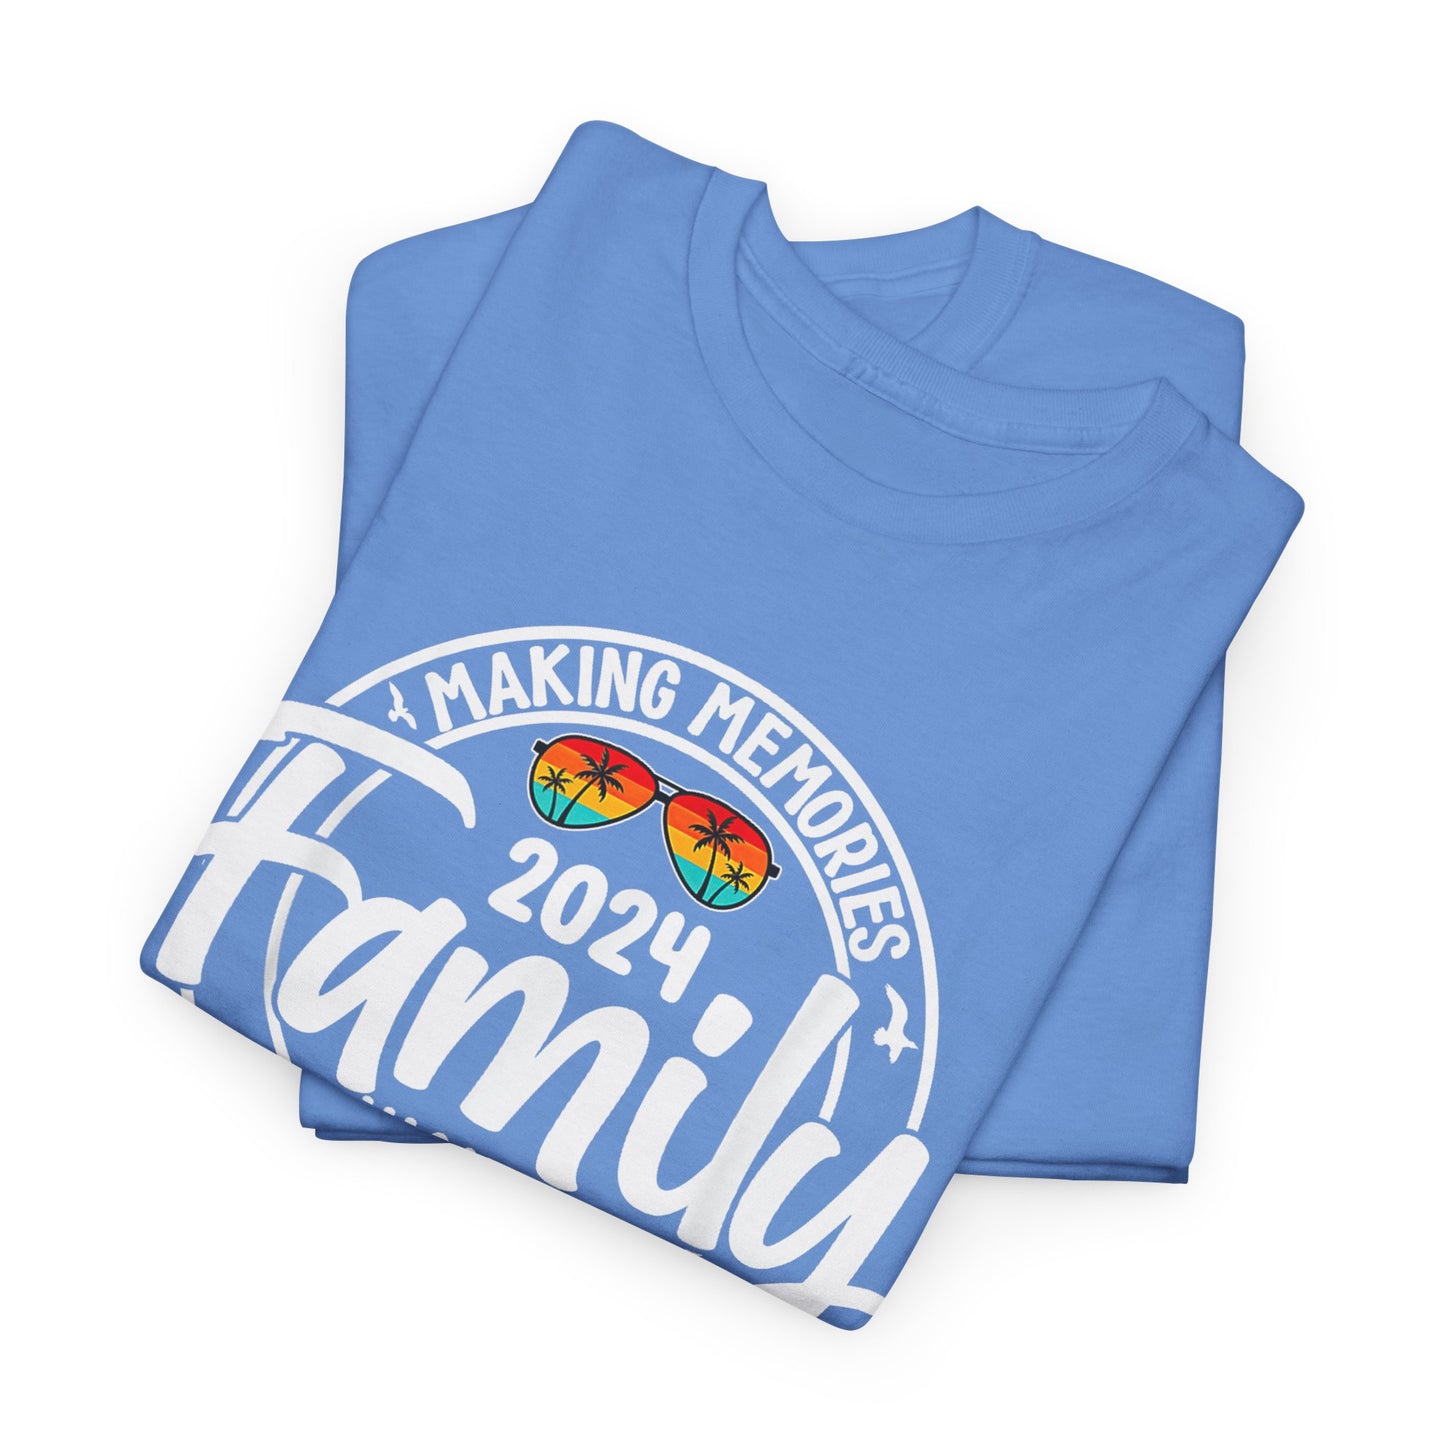 Making Memories Family Vacay - Craftee Designs & Prints 